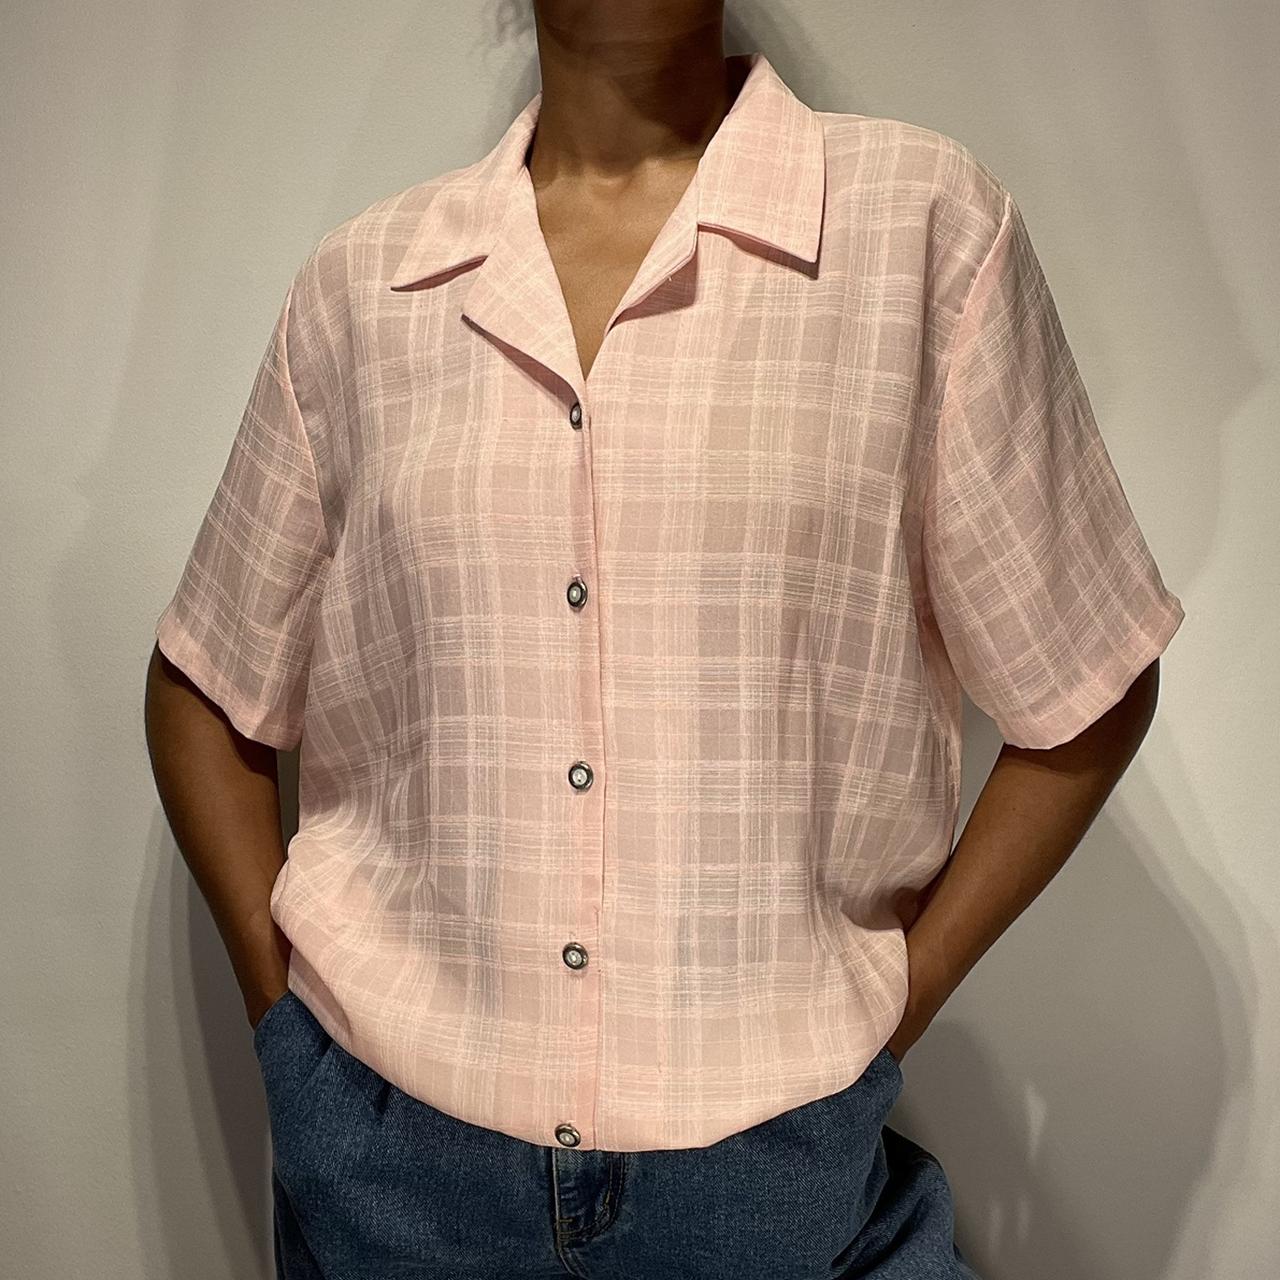 American Vintage Women's Pink and White Blouse